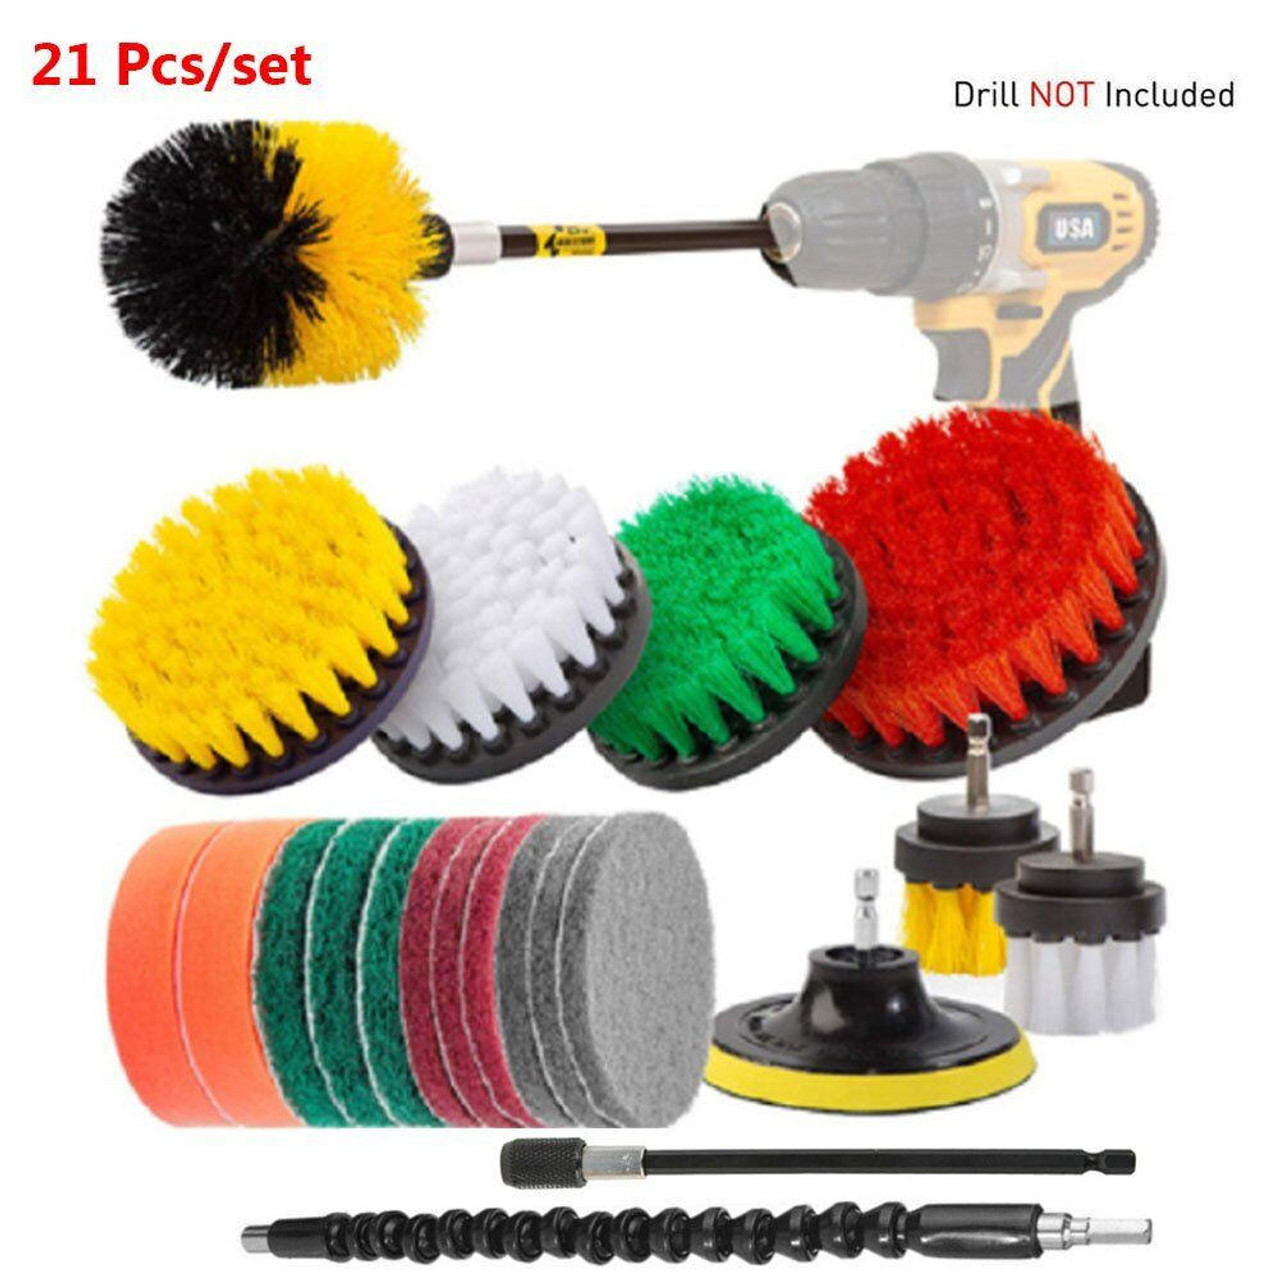 https://cdn11.bigcommerce.com/s-zrh8tkpr8d/images/stencil/1280x1280/products/10076/31579/1221-pcs-electric-drill-brush-attachment-set-cleaning-kit-power-scrubber-pads__60551.1675296151.jpg?c=2&imbypass=on